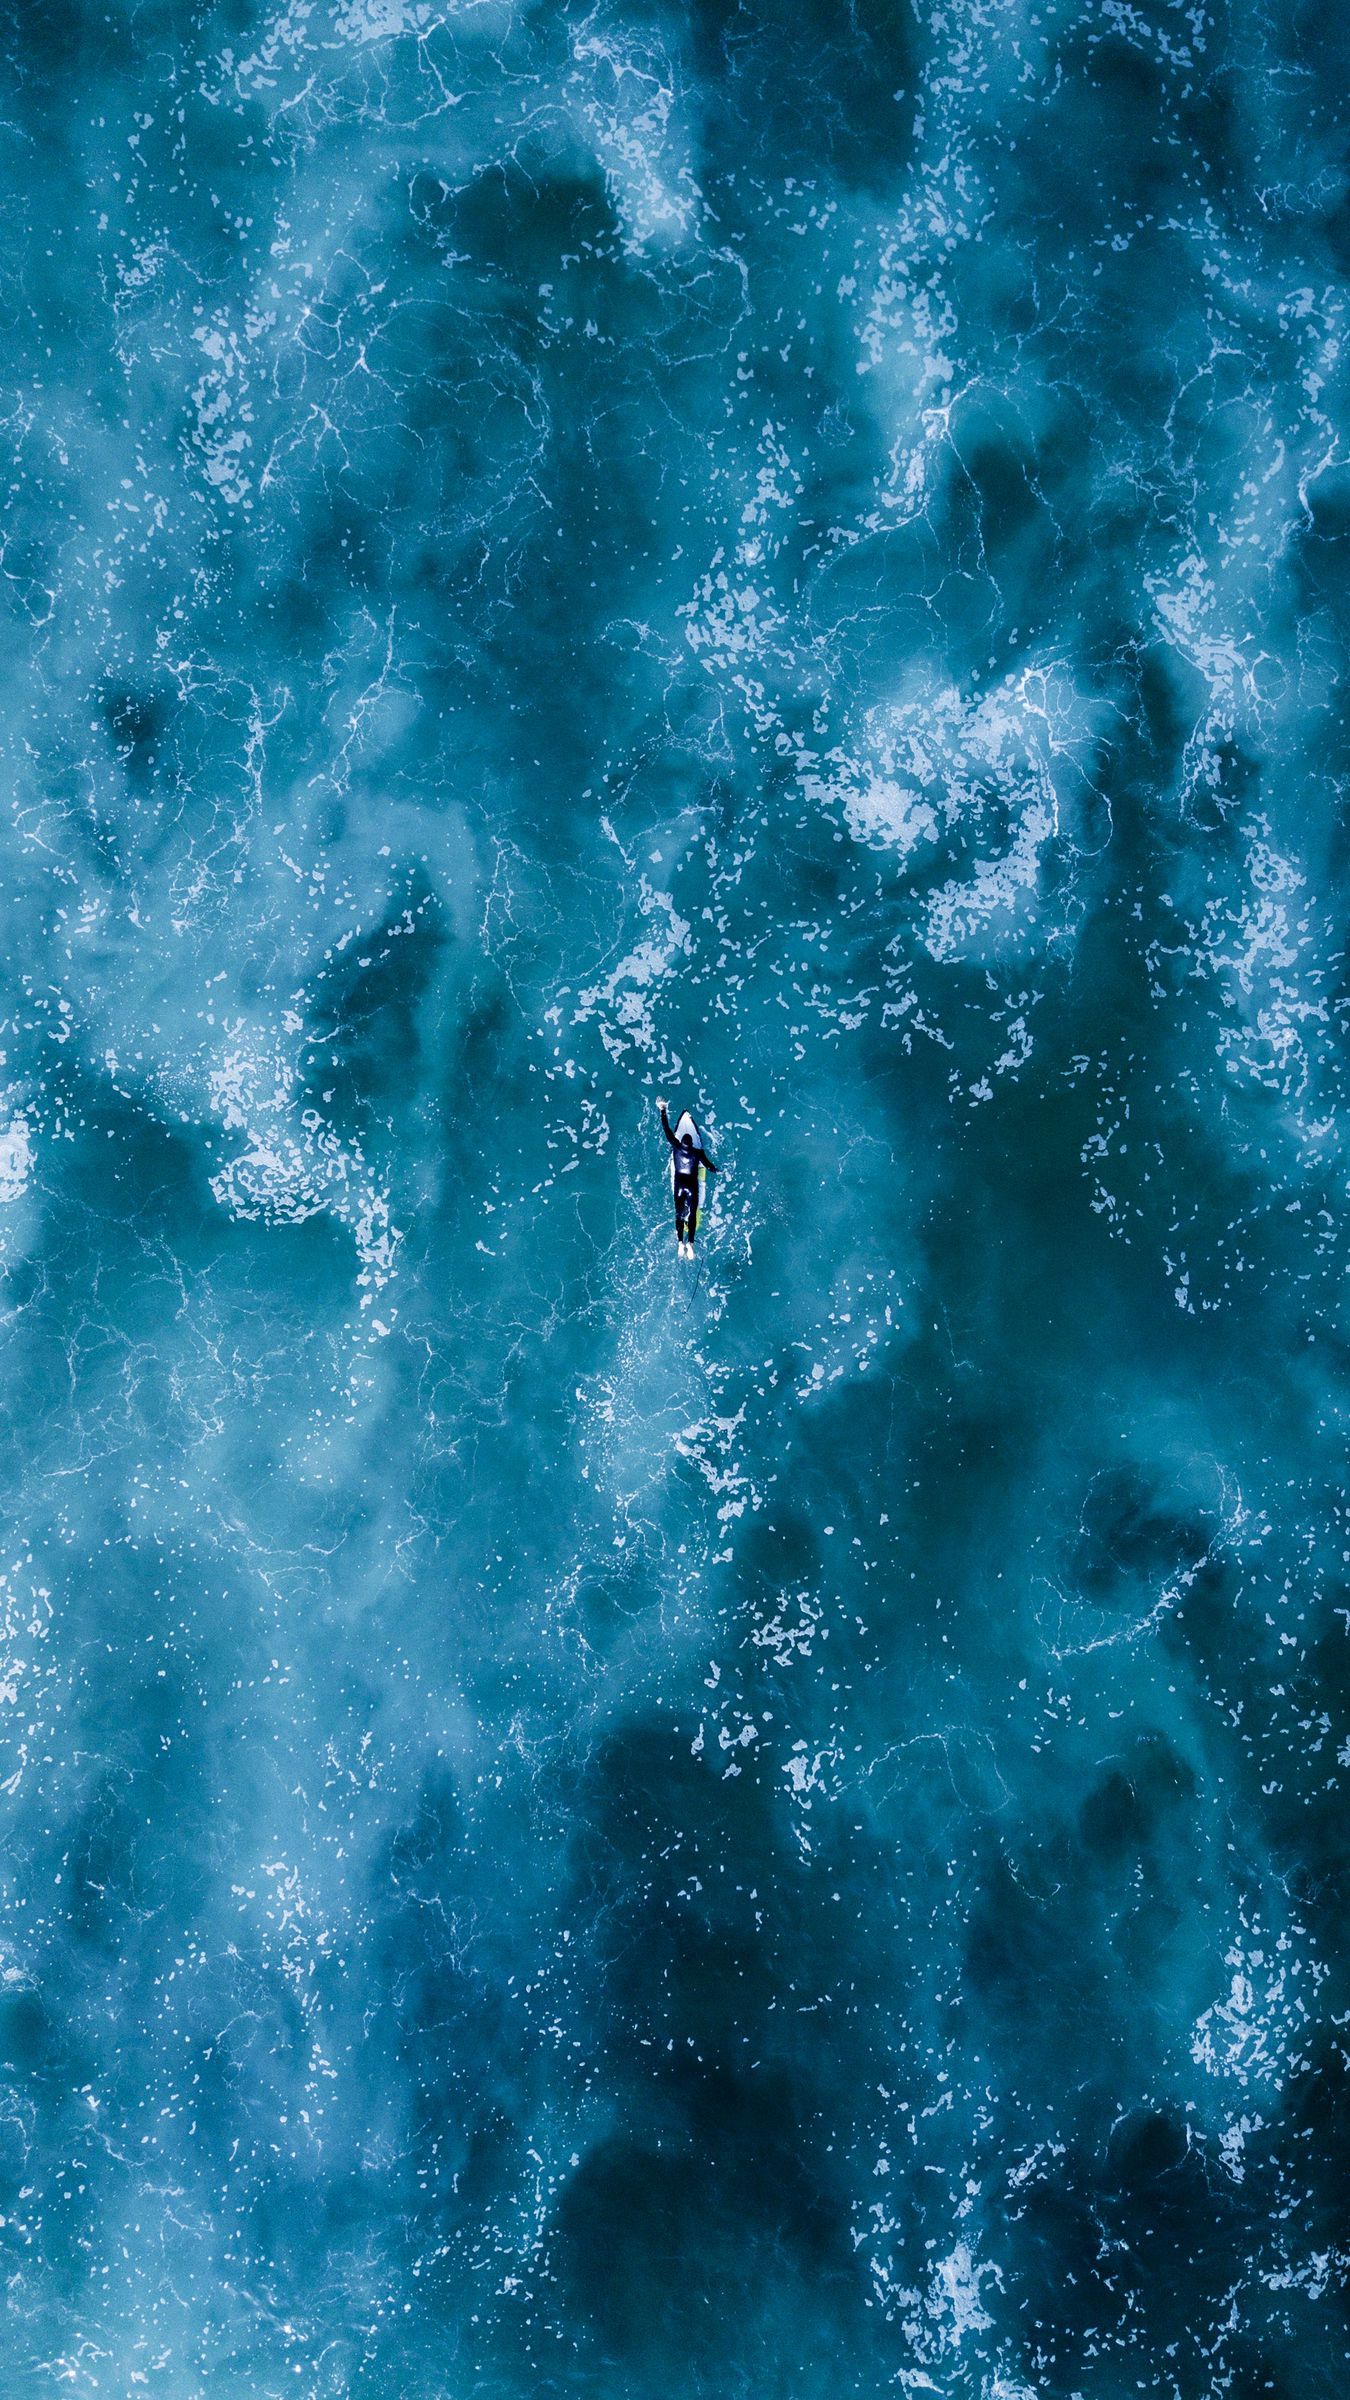 Aerial view of a person in the middle of the ocean - Surf, ocean